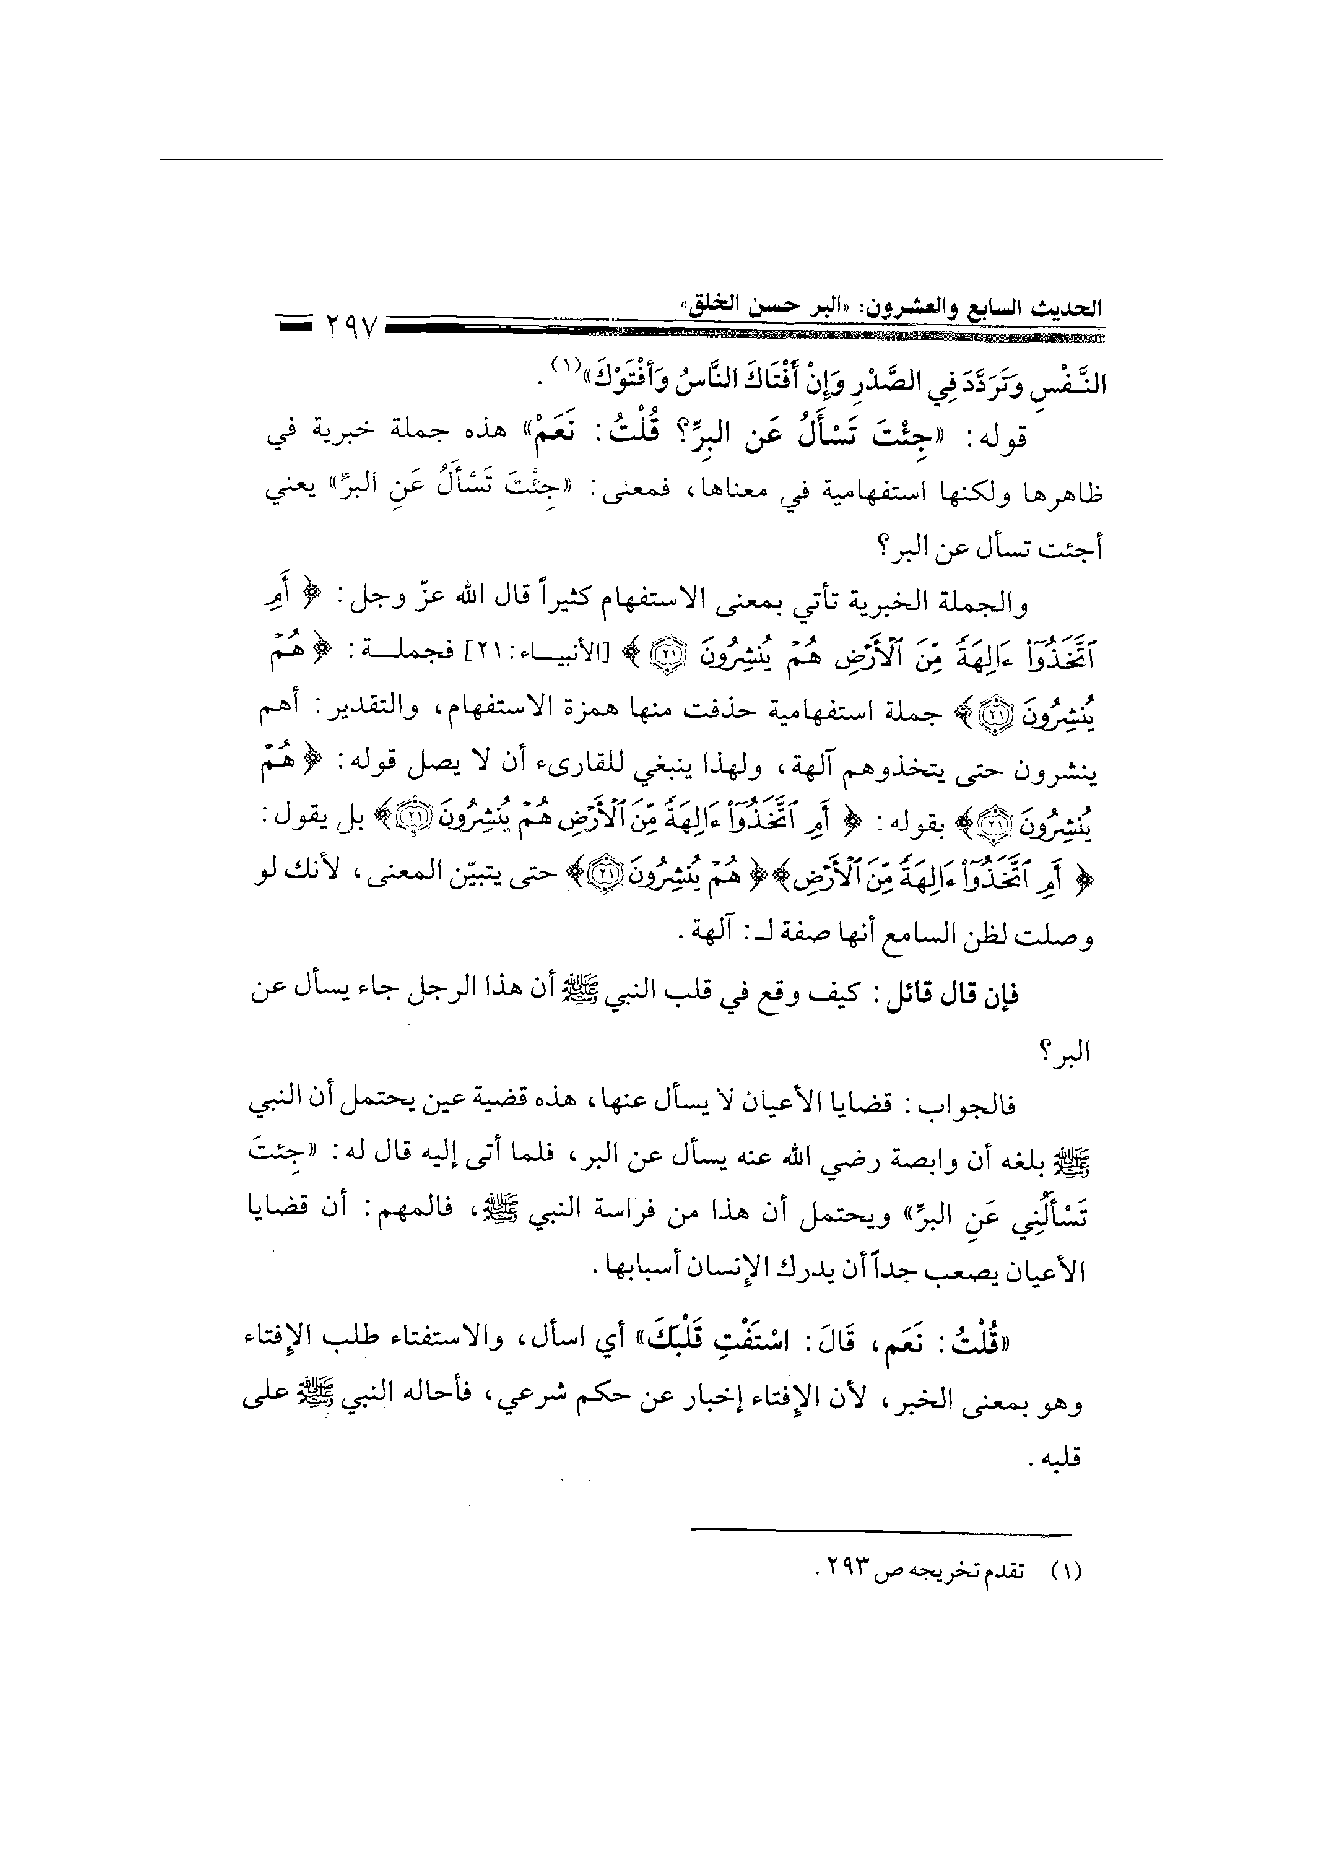 Page 297